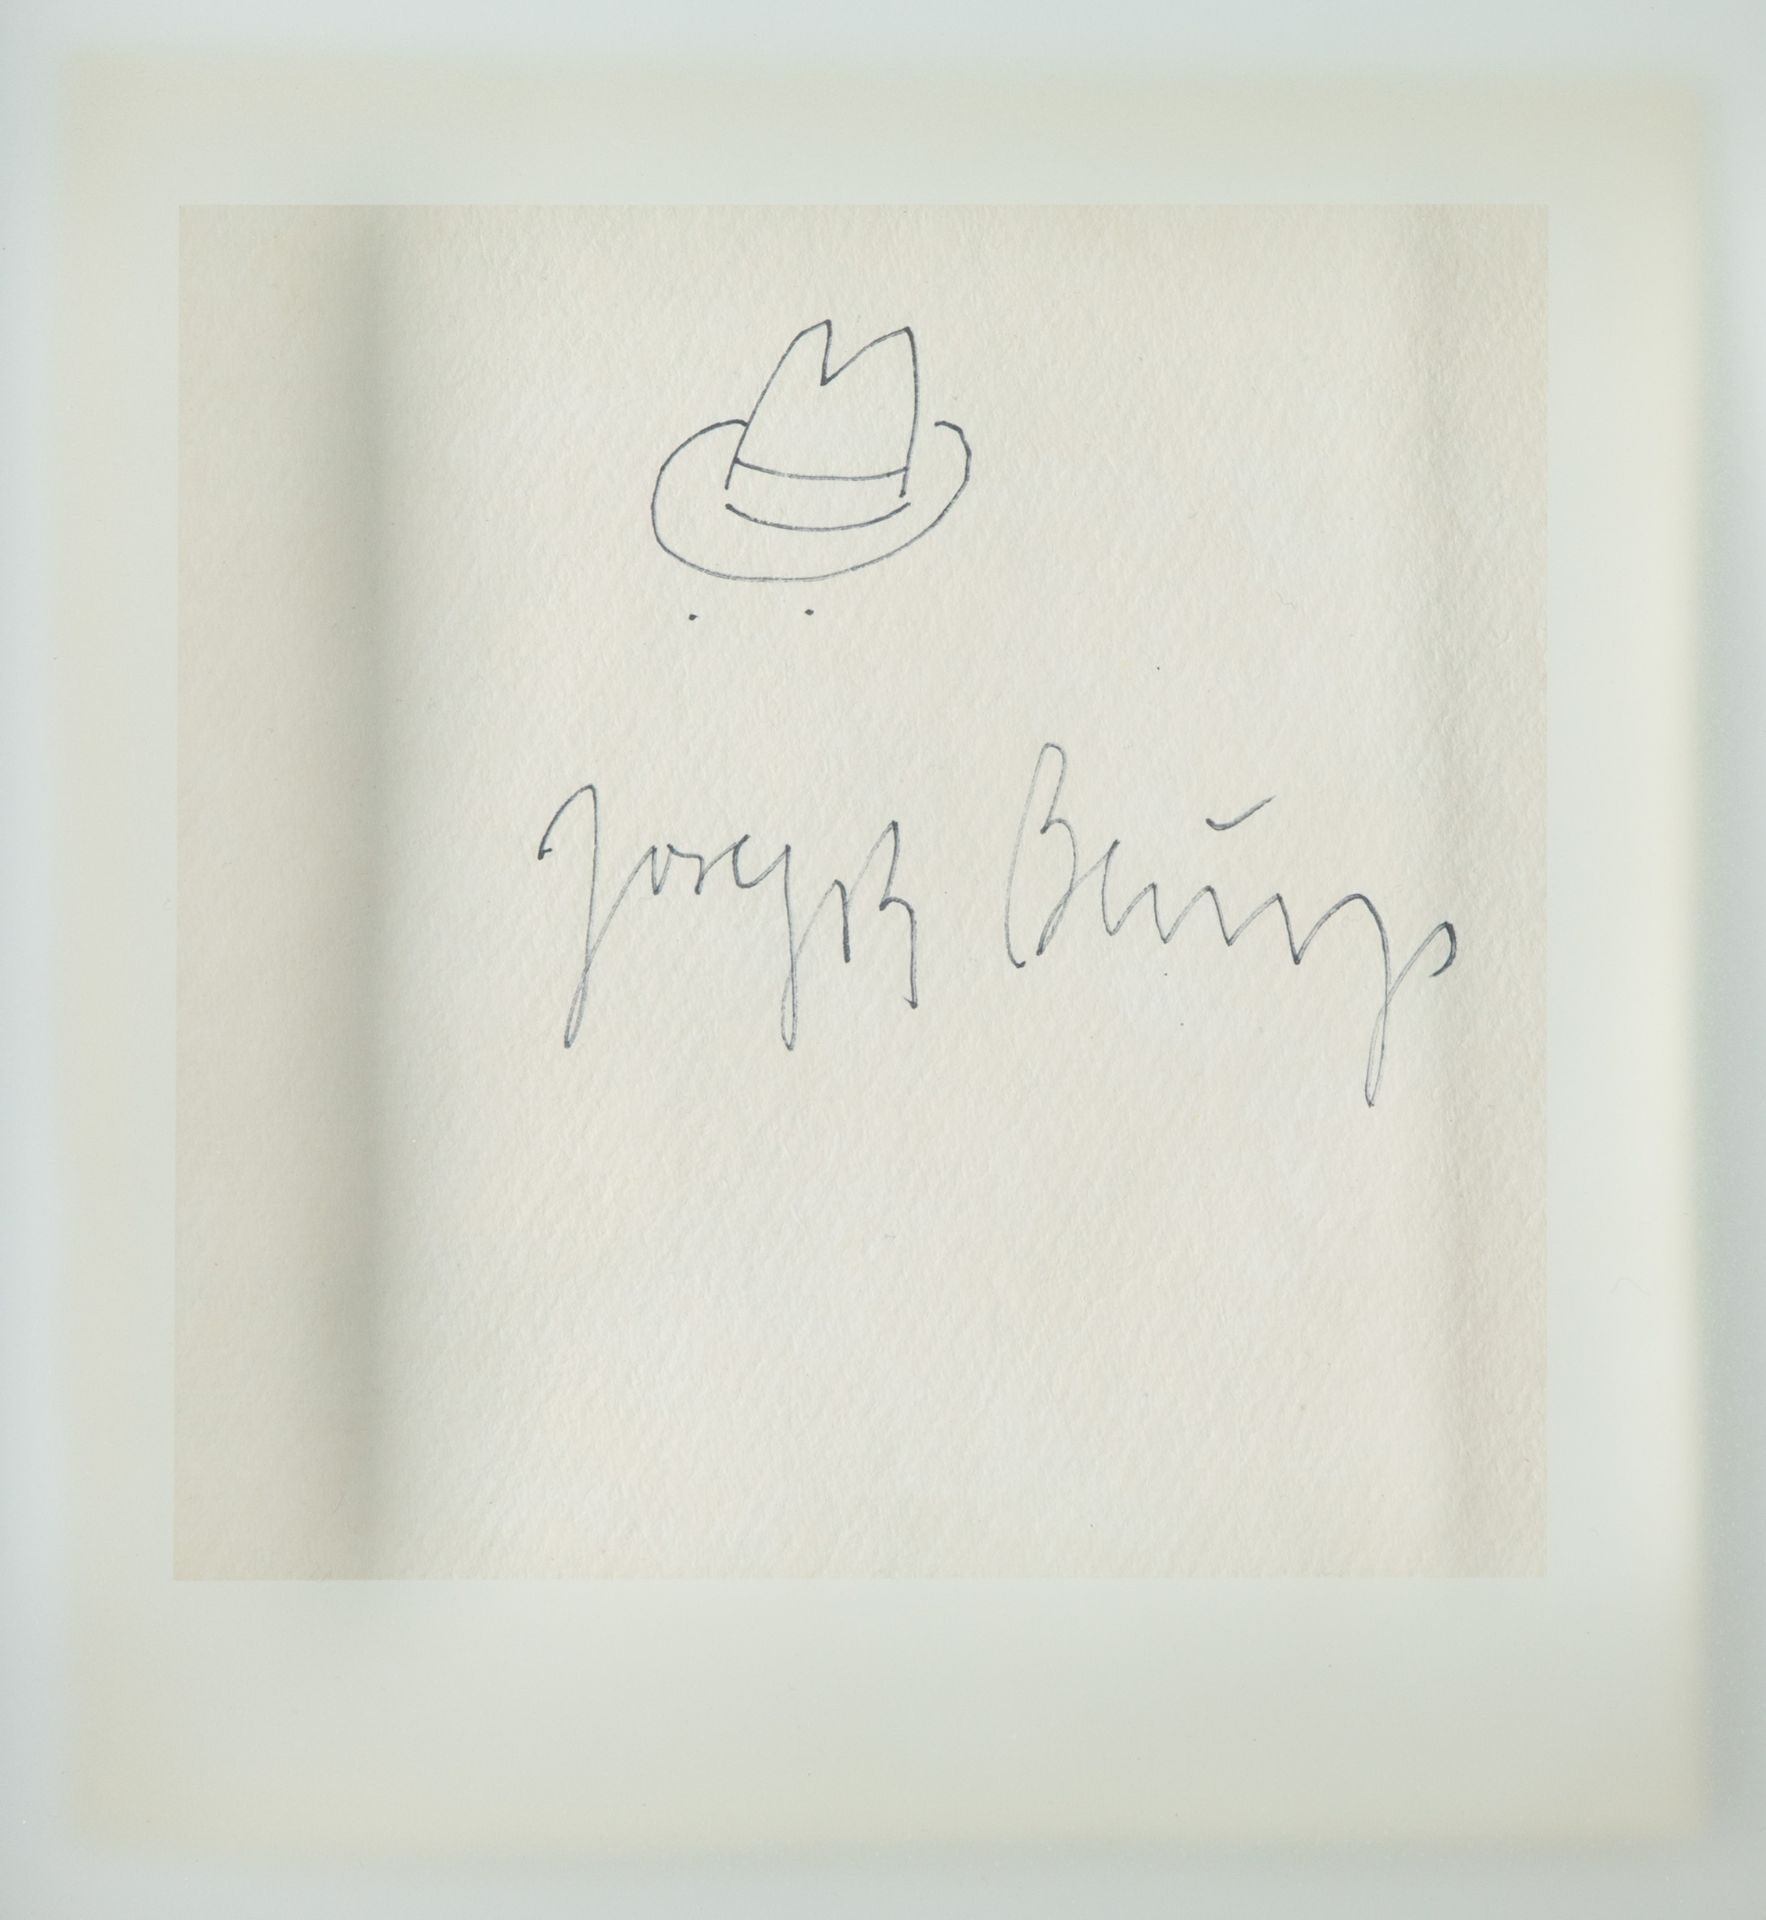 Joseph Beuys*, Drawing, hat with signature, 1979 - Image 2 of 3